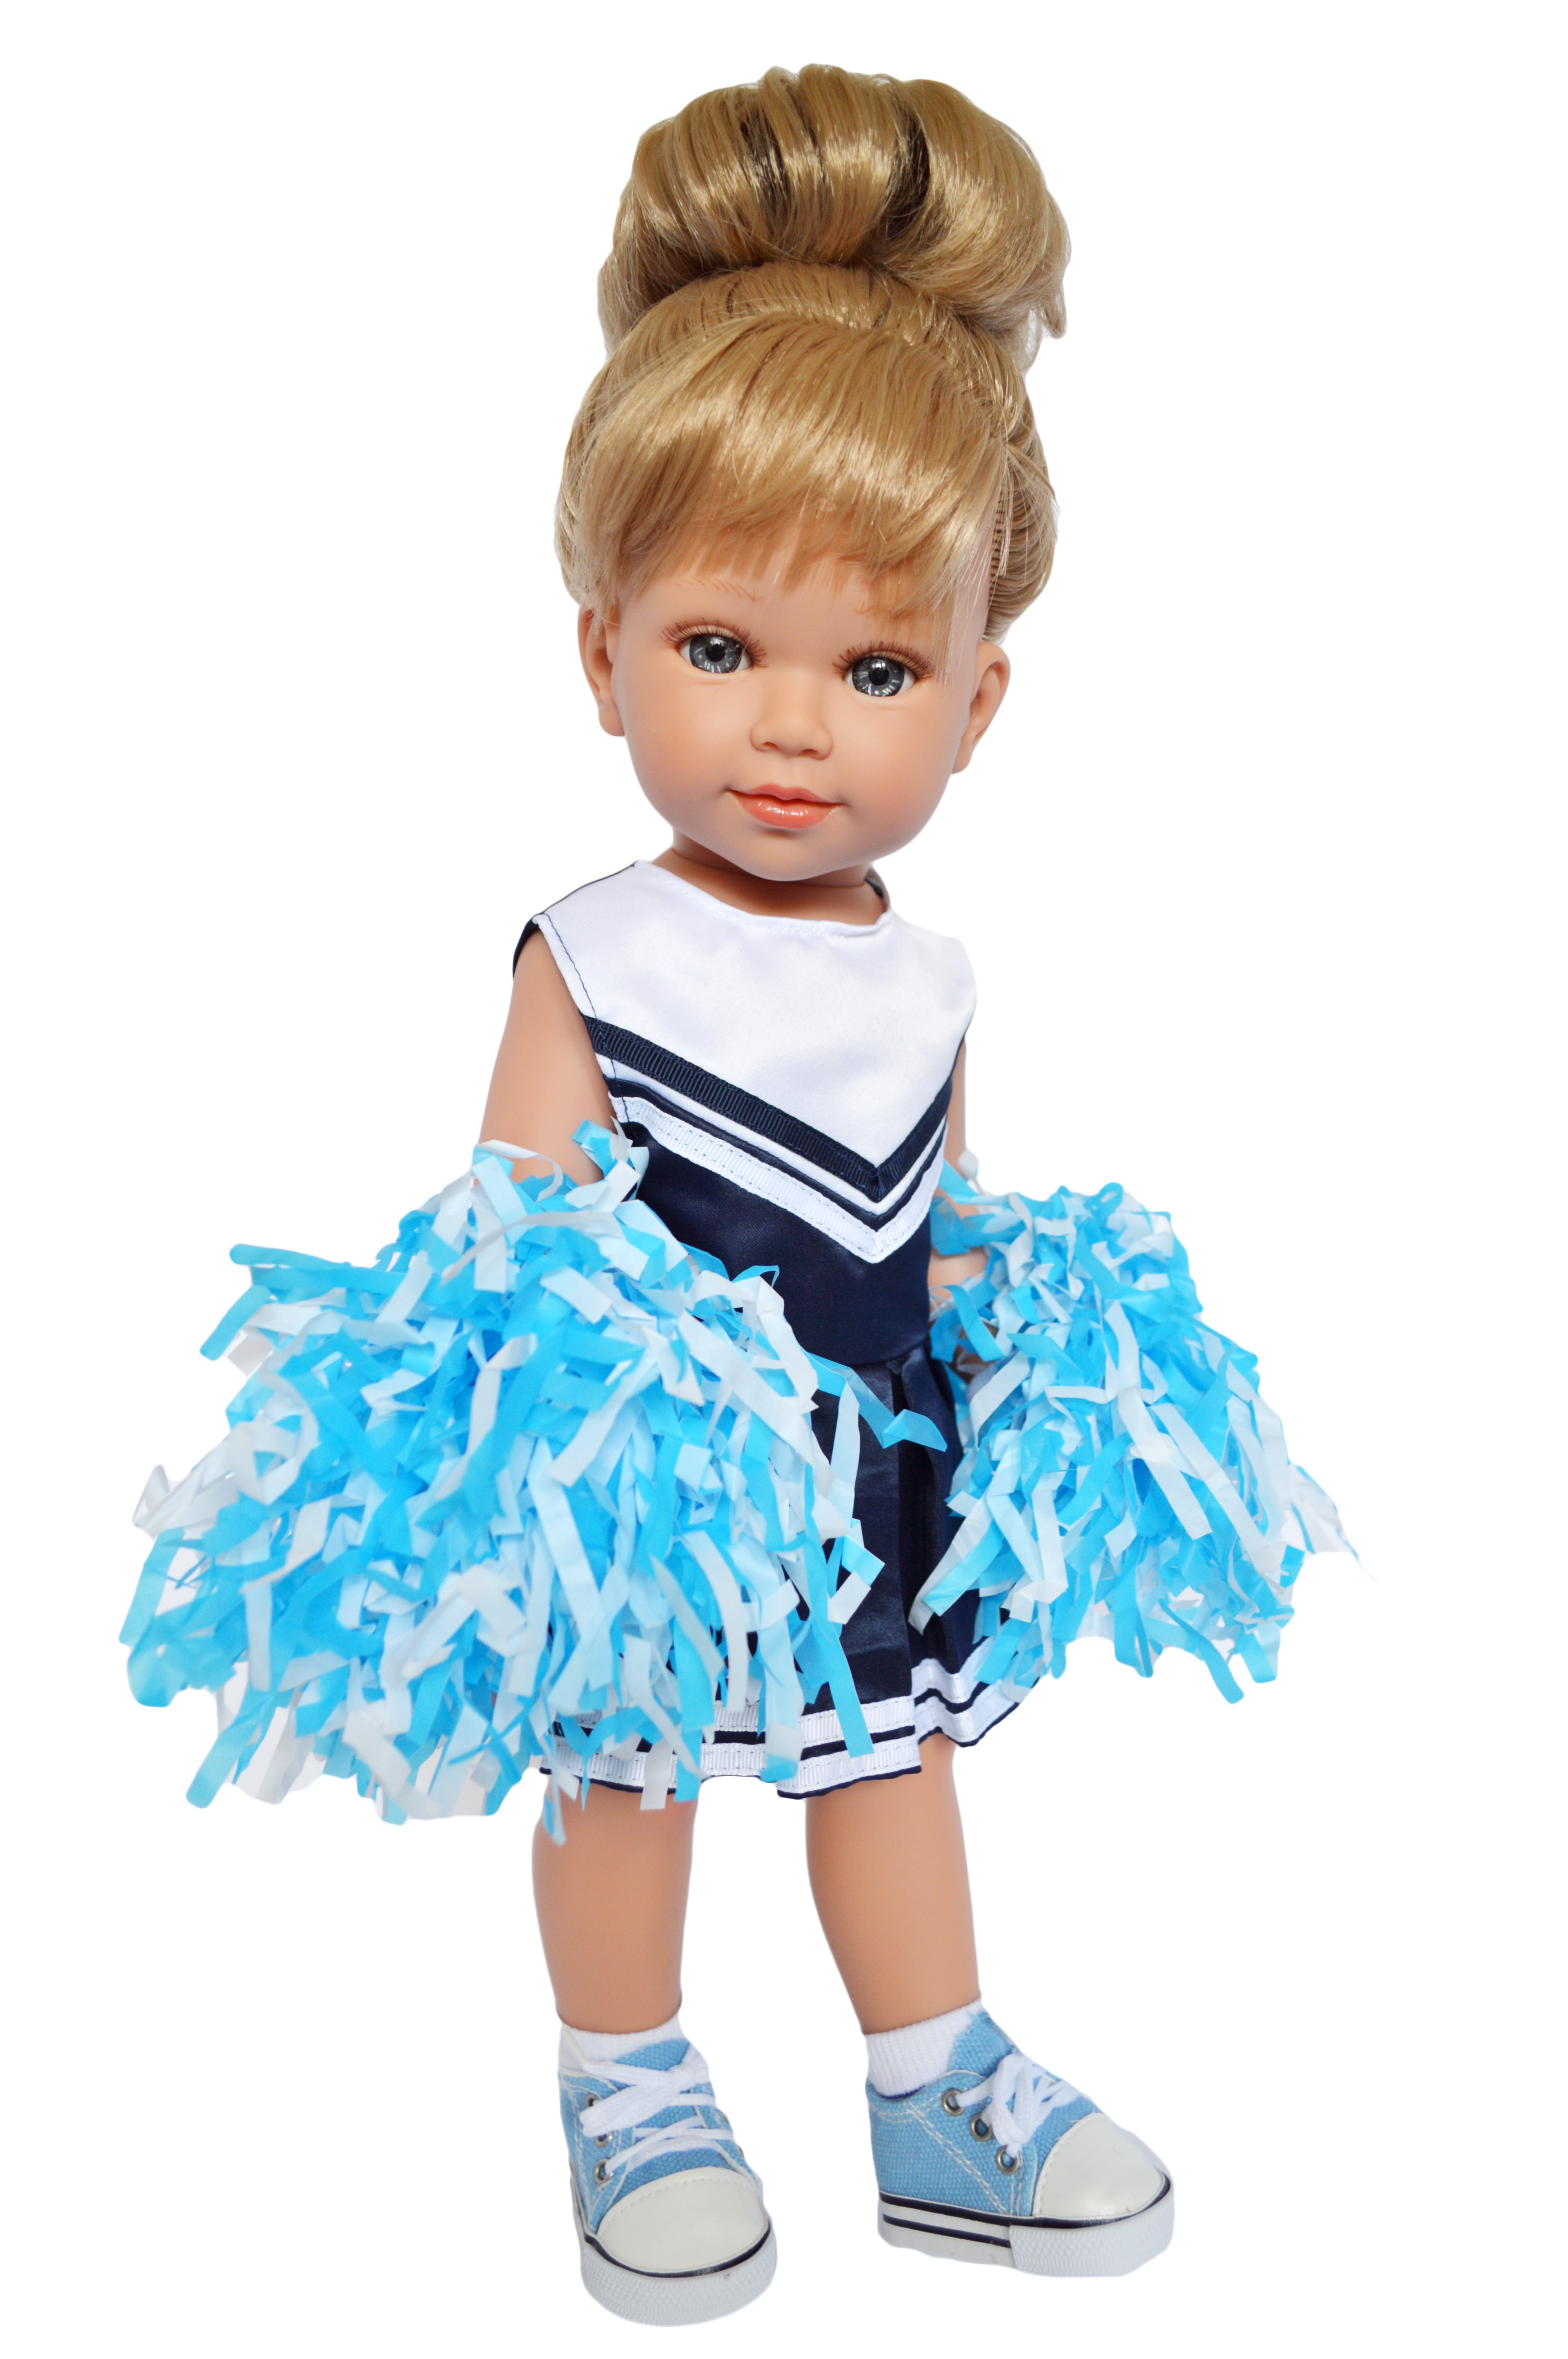 18 Inch Doll Clothes- Blue and White Cheerleader Outfit Fits 18 Inch  Fashion Girl Dolls